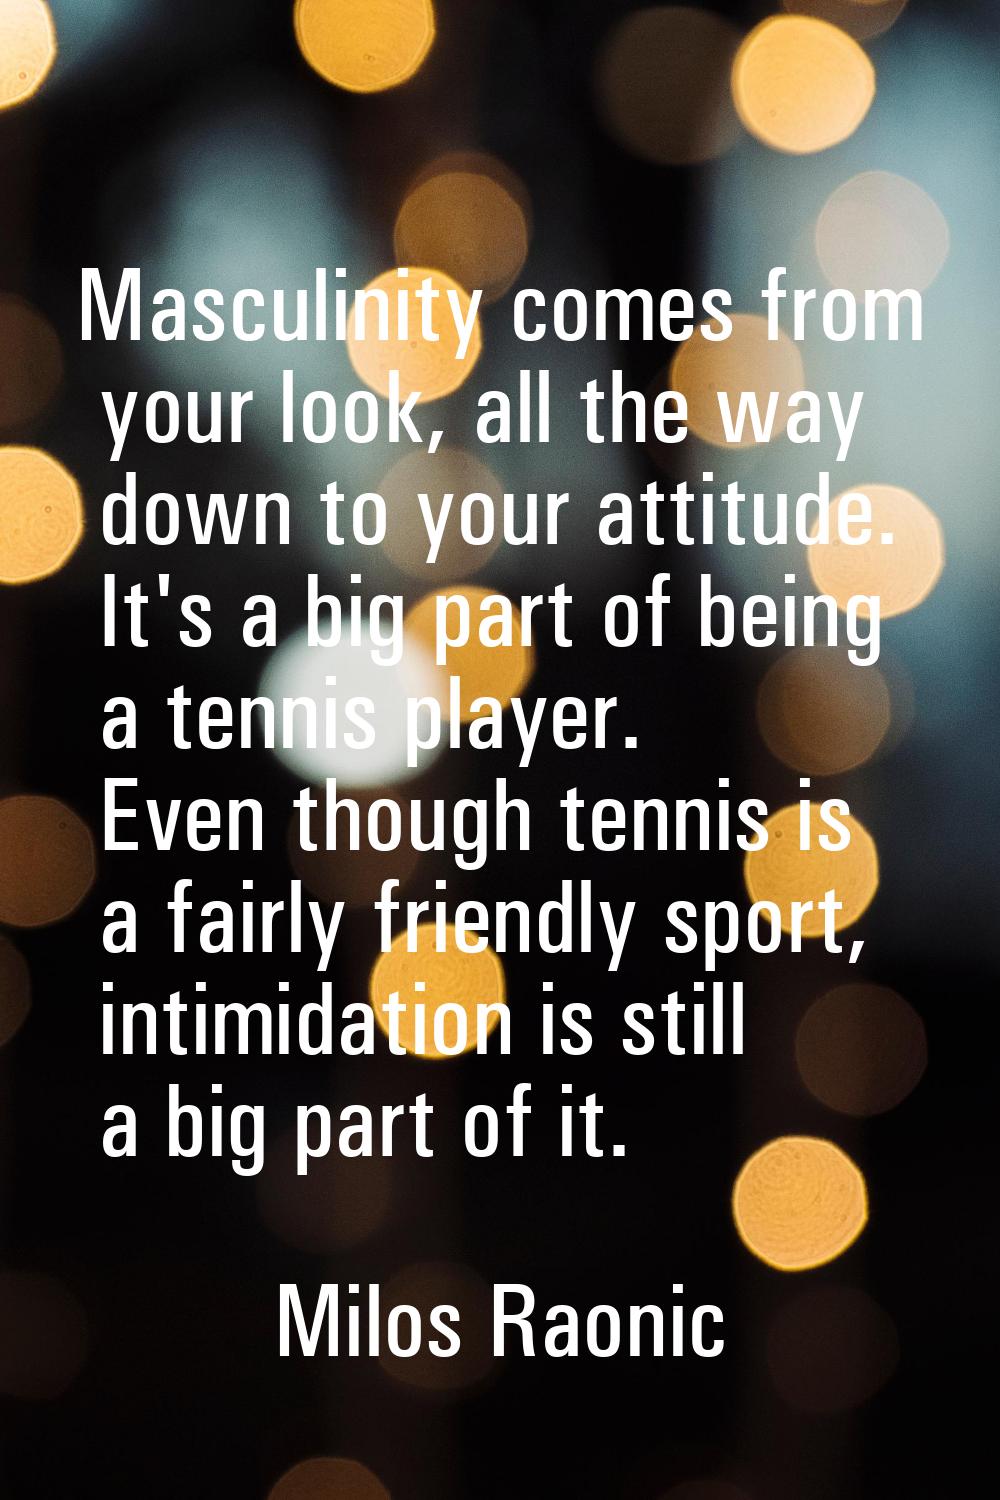 Masculinity comes from your look, all the way down to your attitude. It's a big part of being a ten